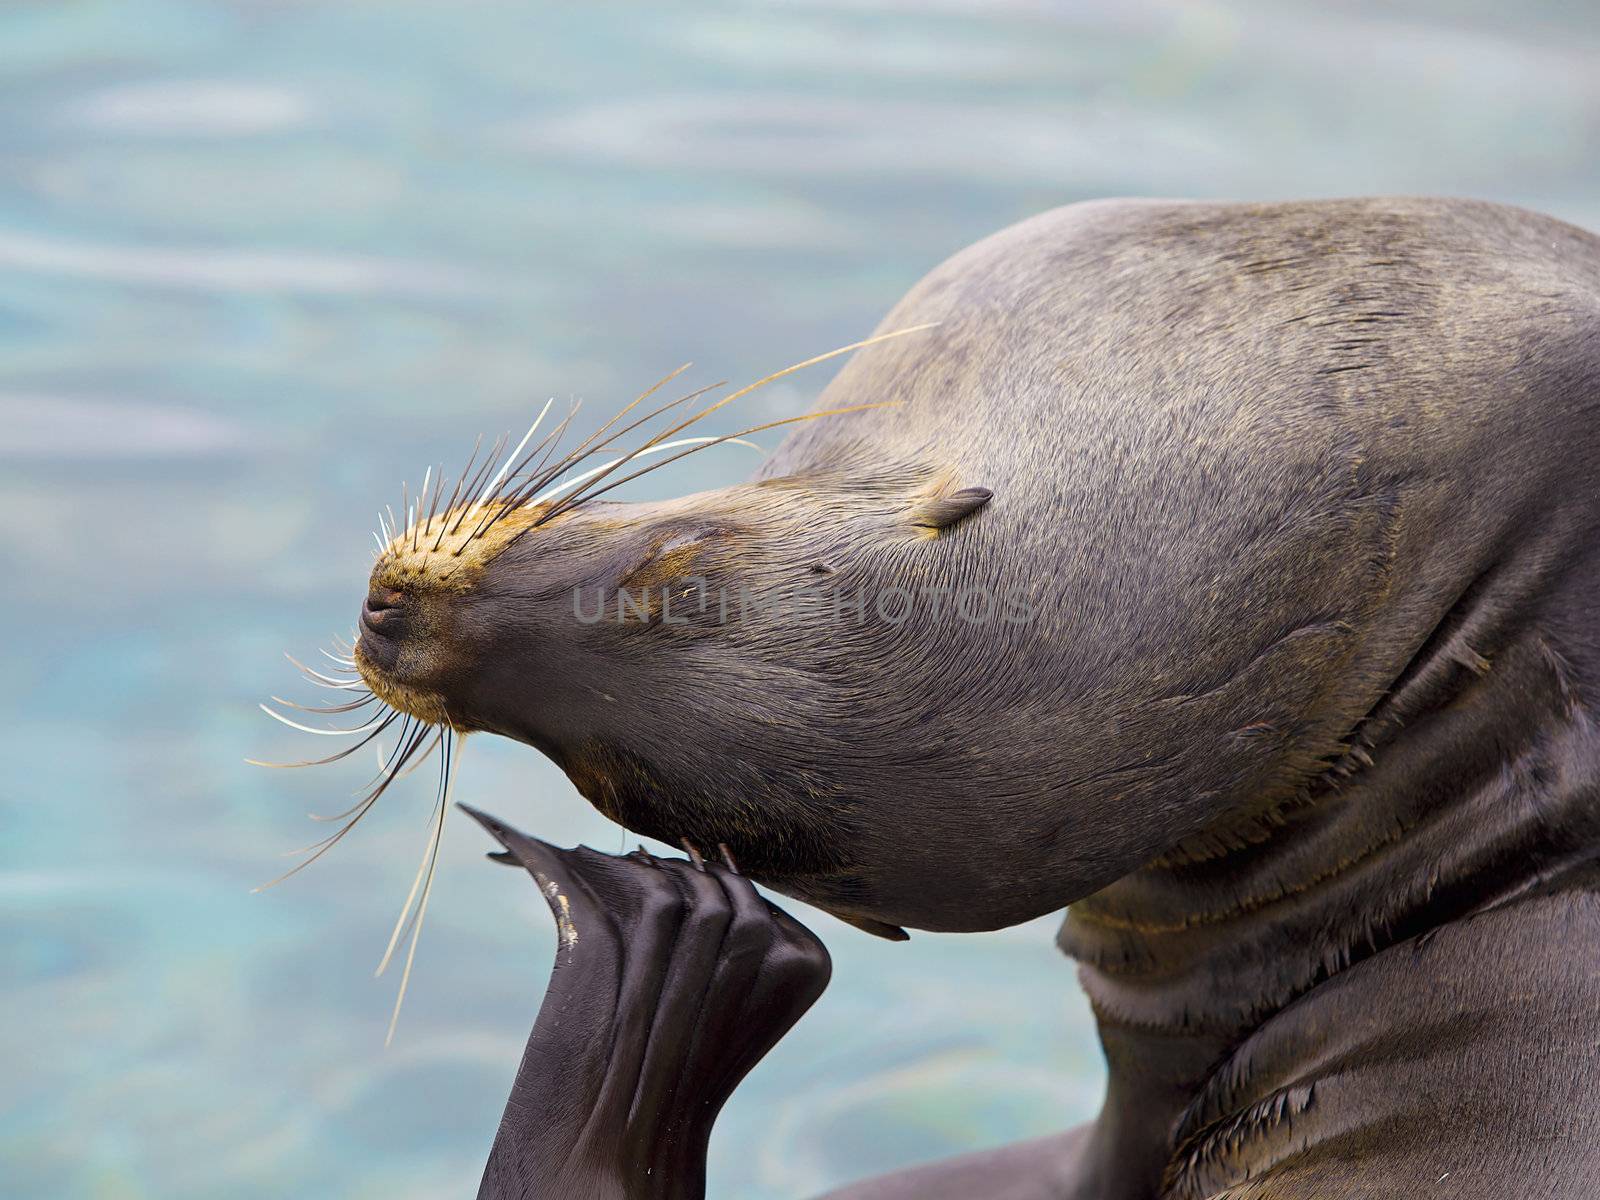 Sea lion scratching his cheek, ocean in the background